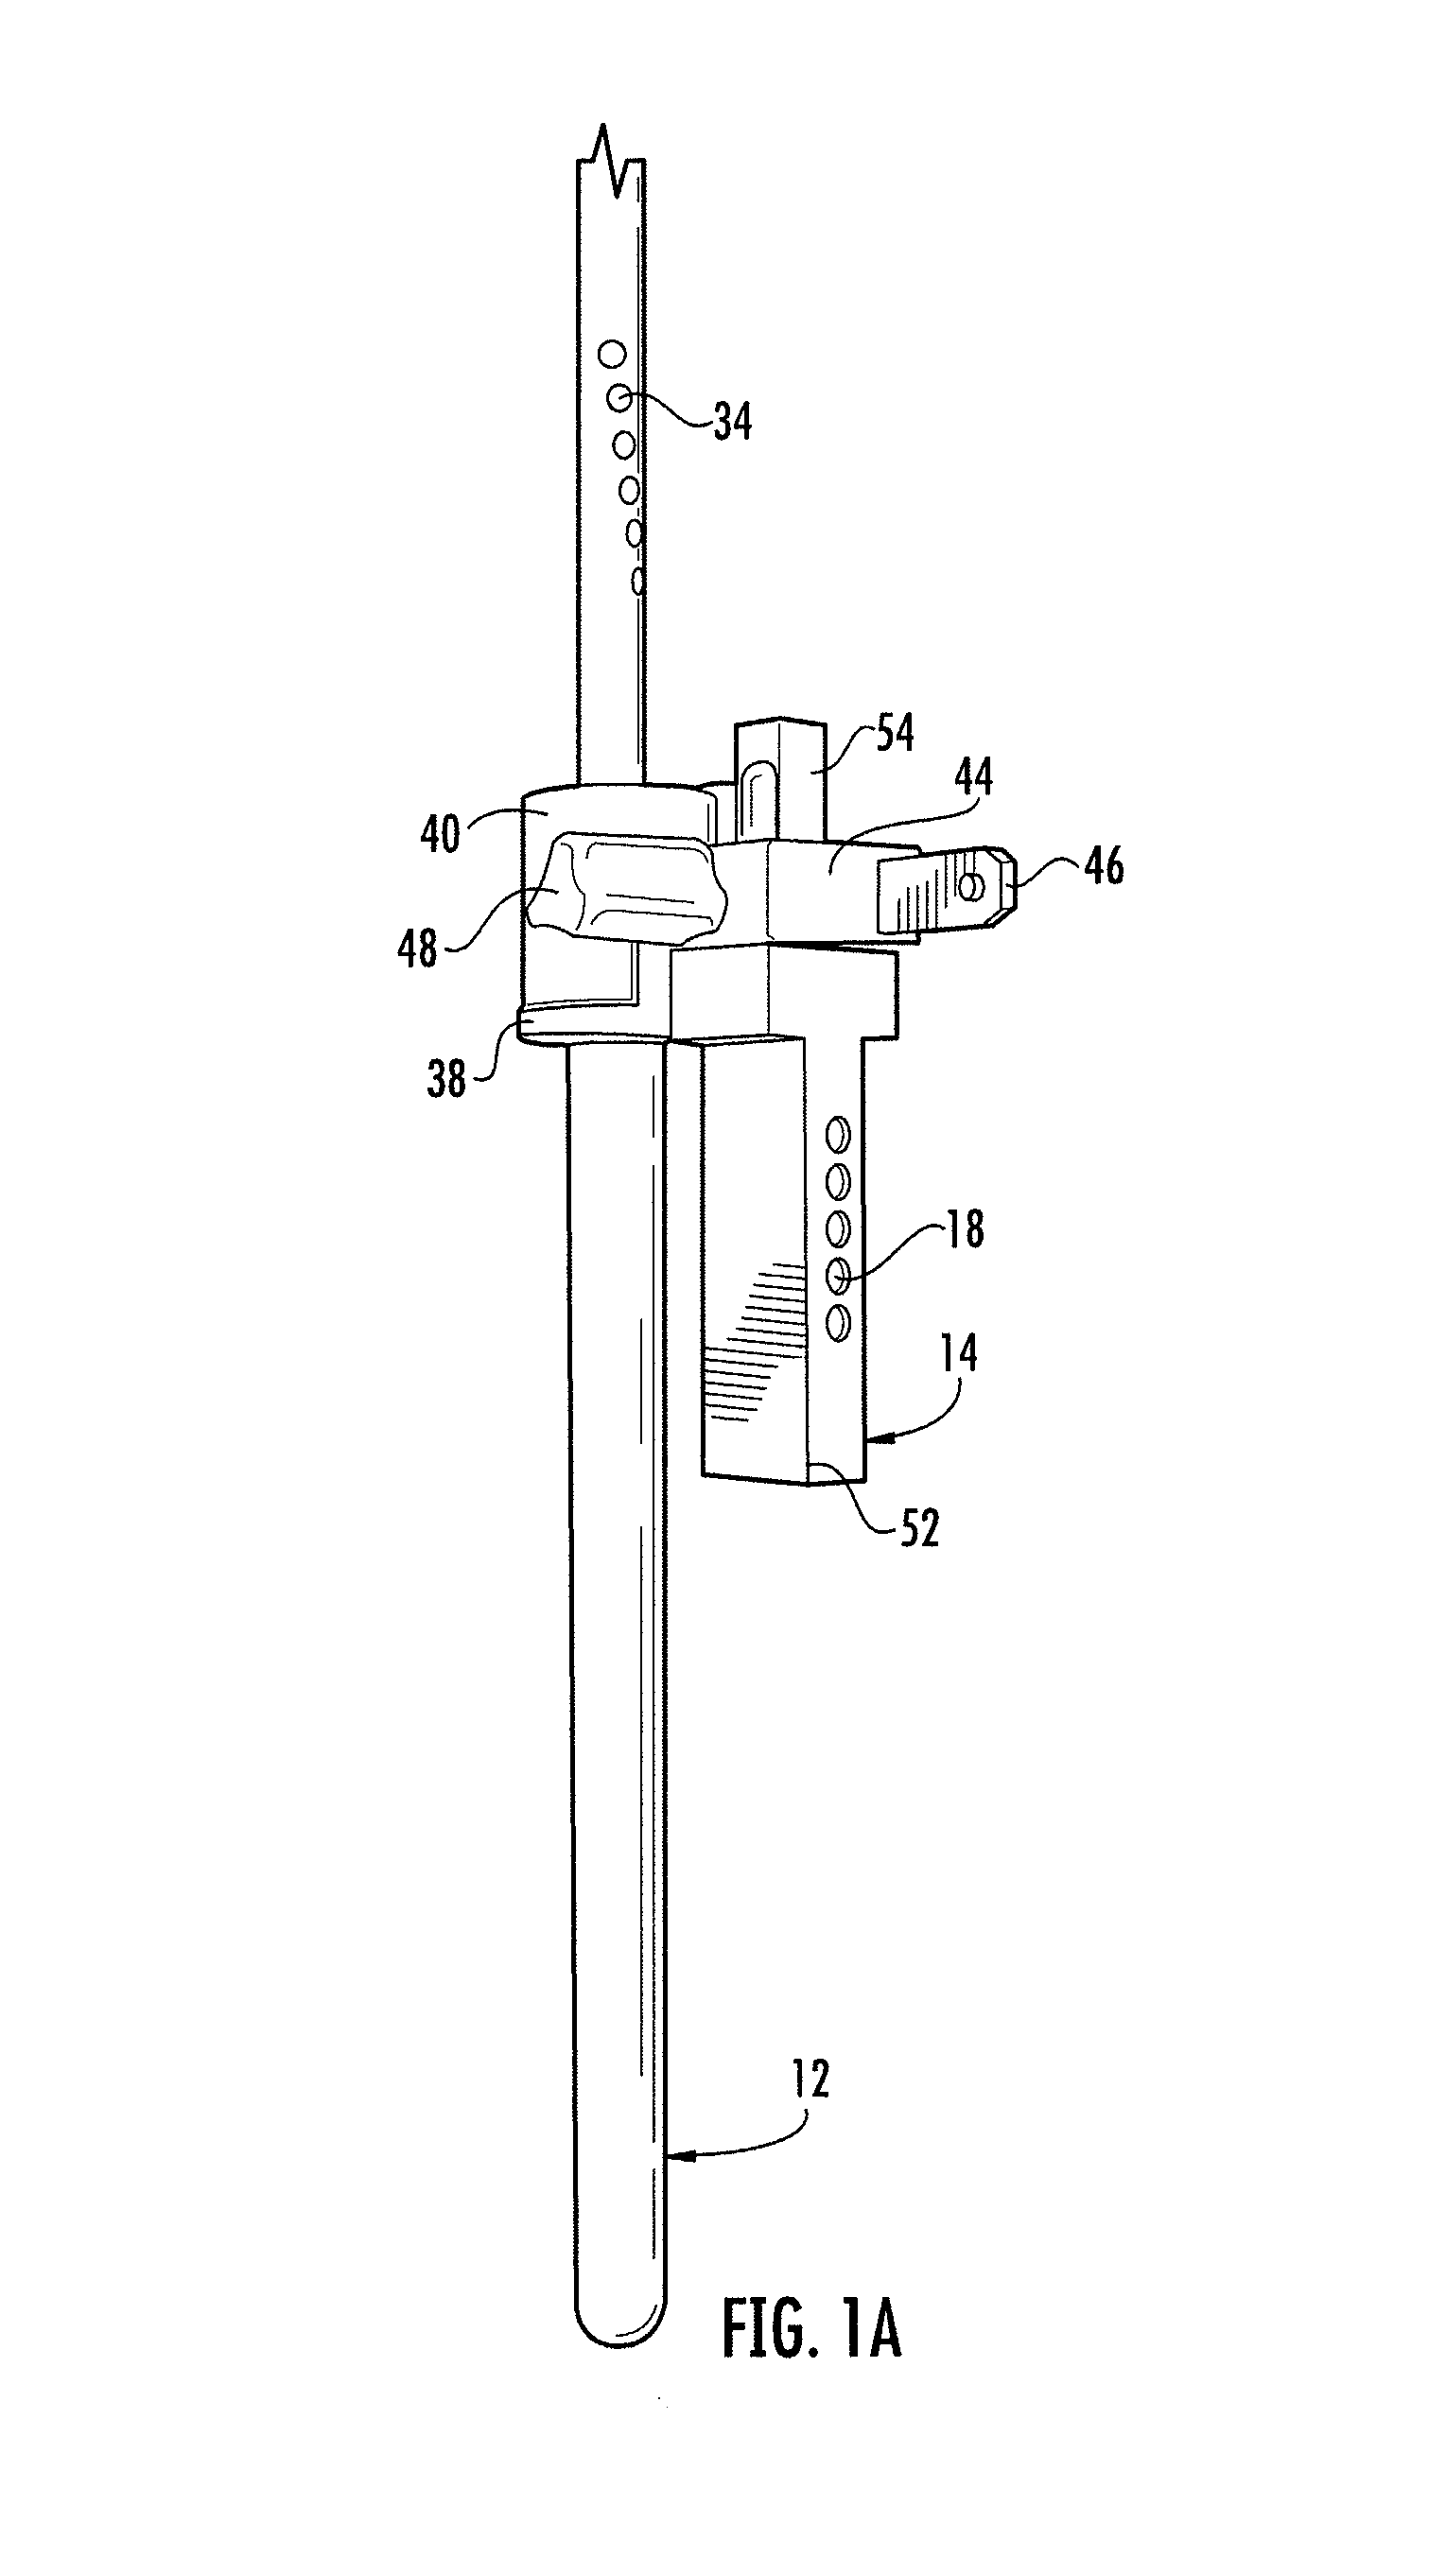 System for treating proximal humeral fractures and method of using the same